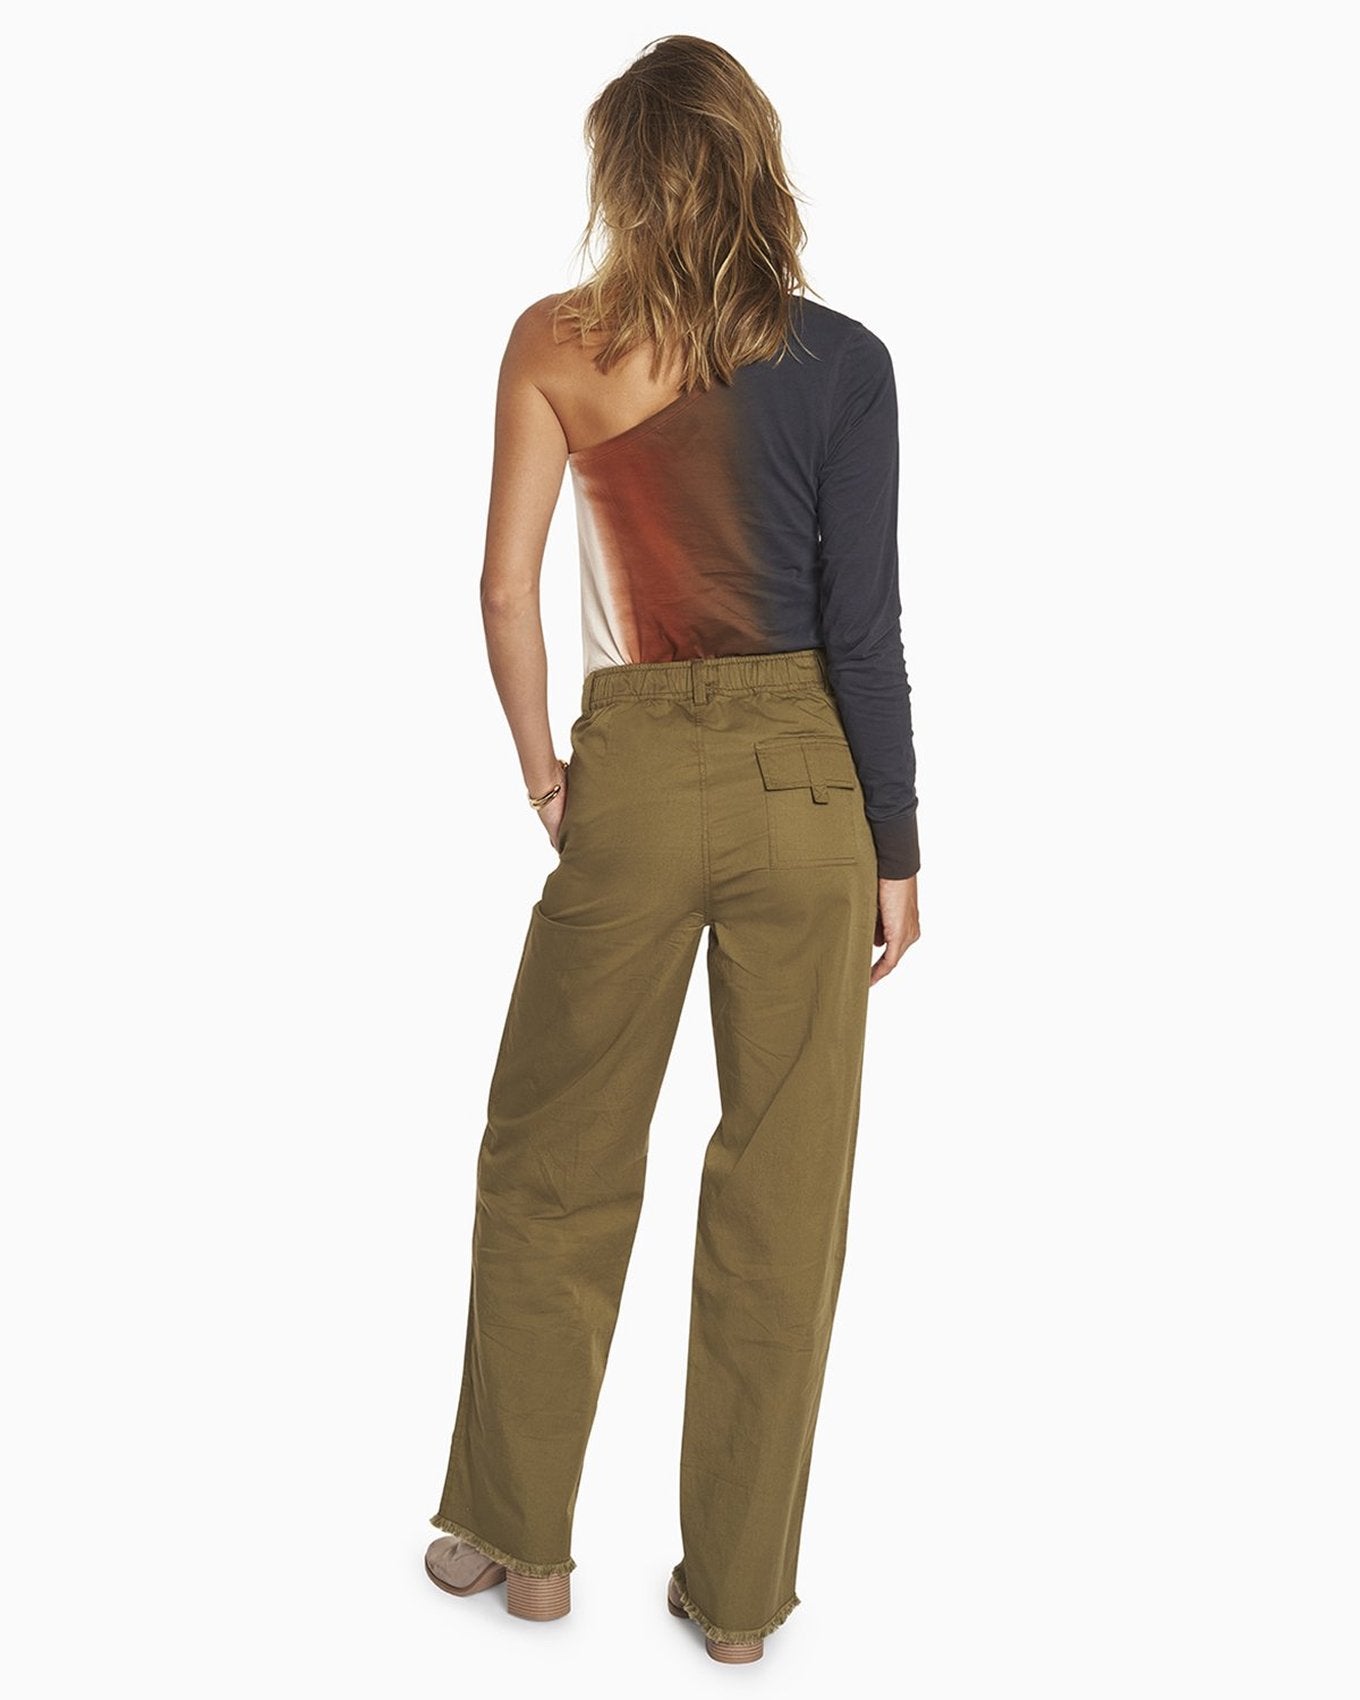 YesAnd Organic Utility Pant Pant in color Olive Branch and shape pants